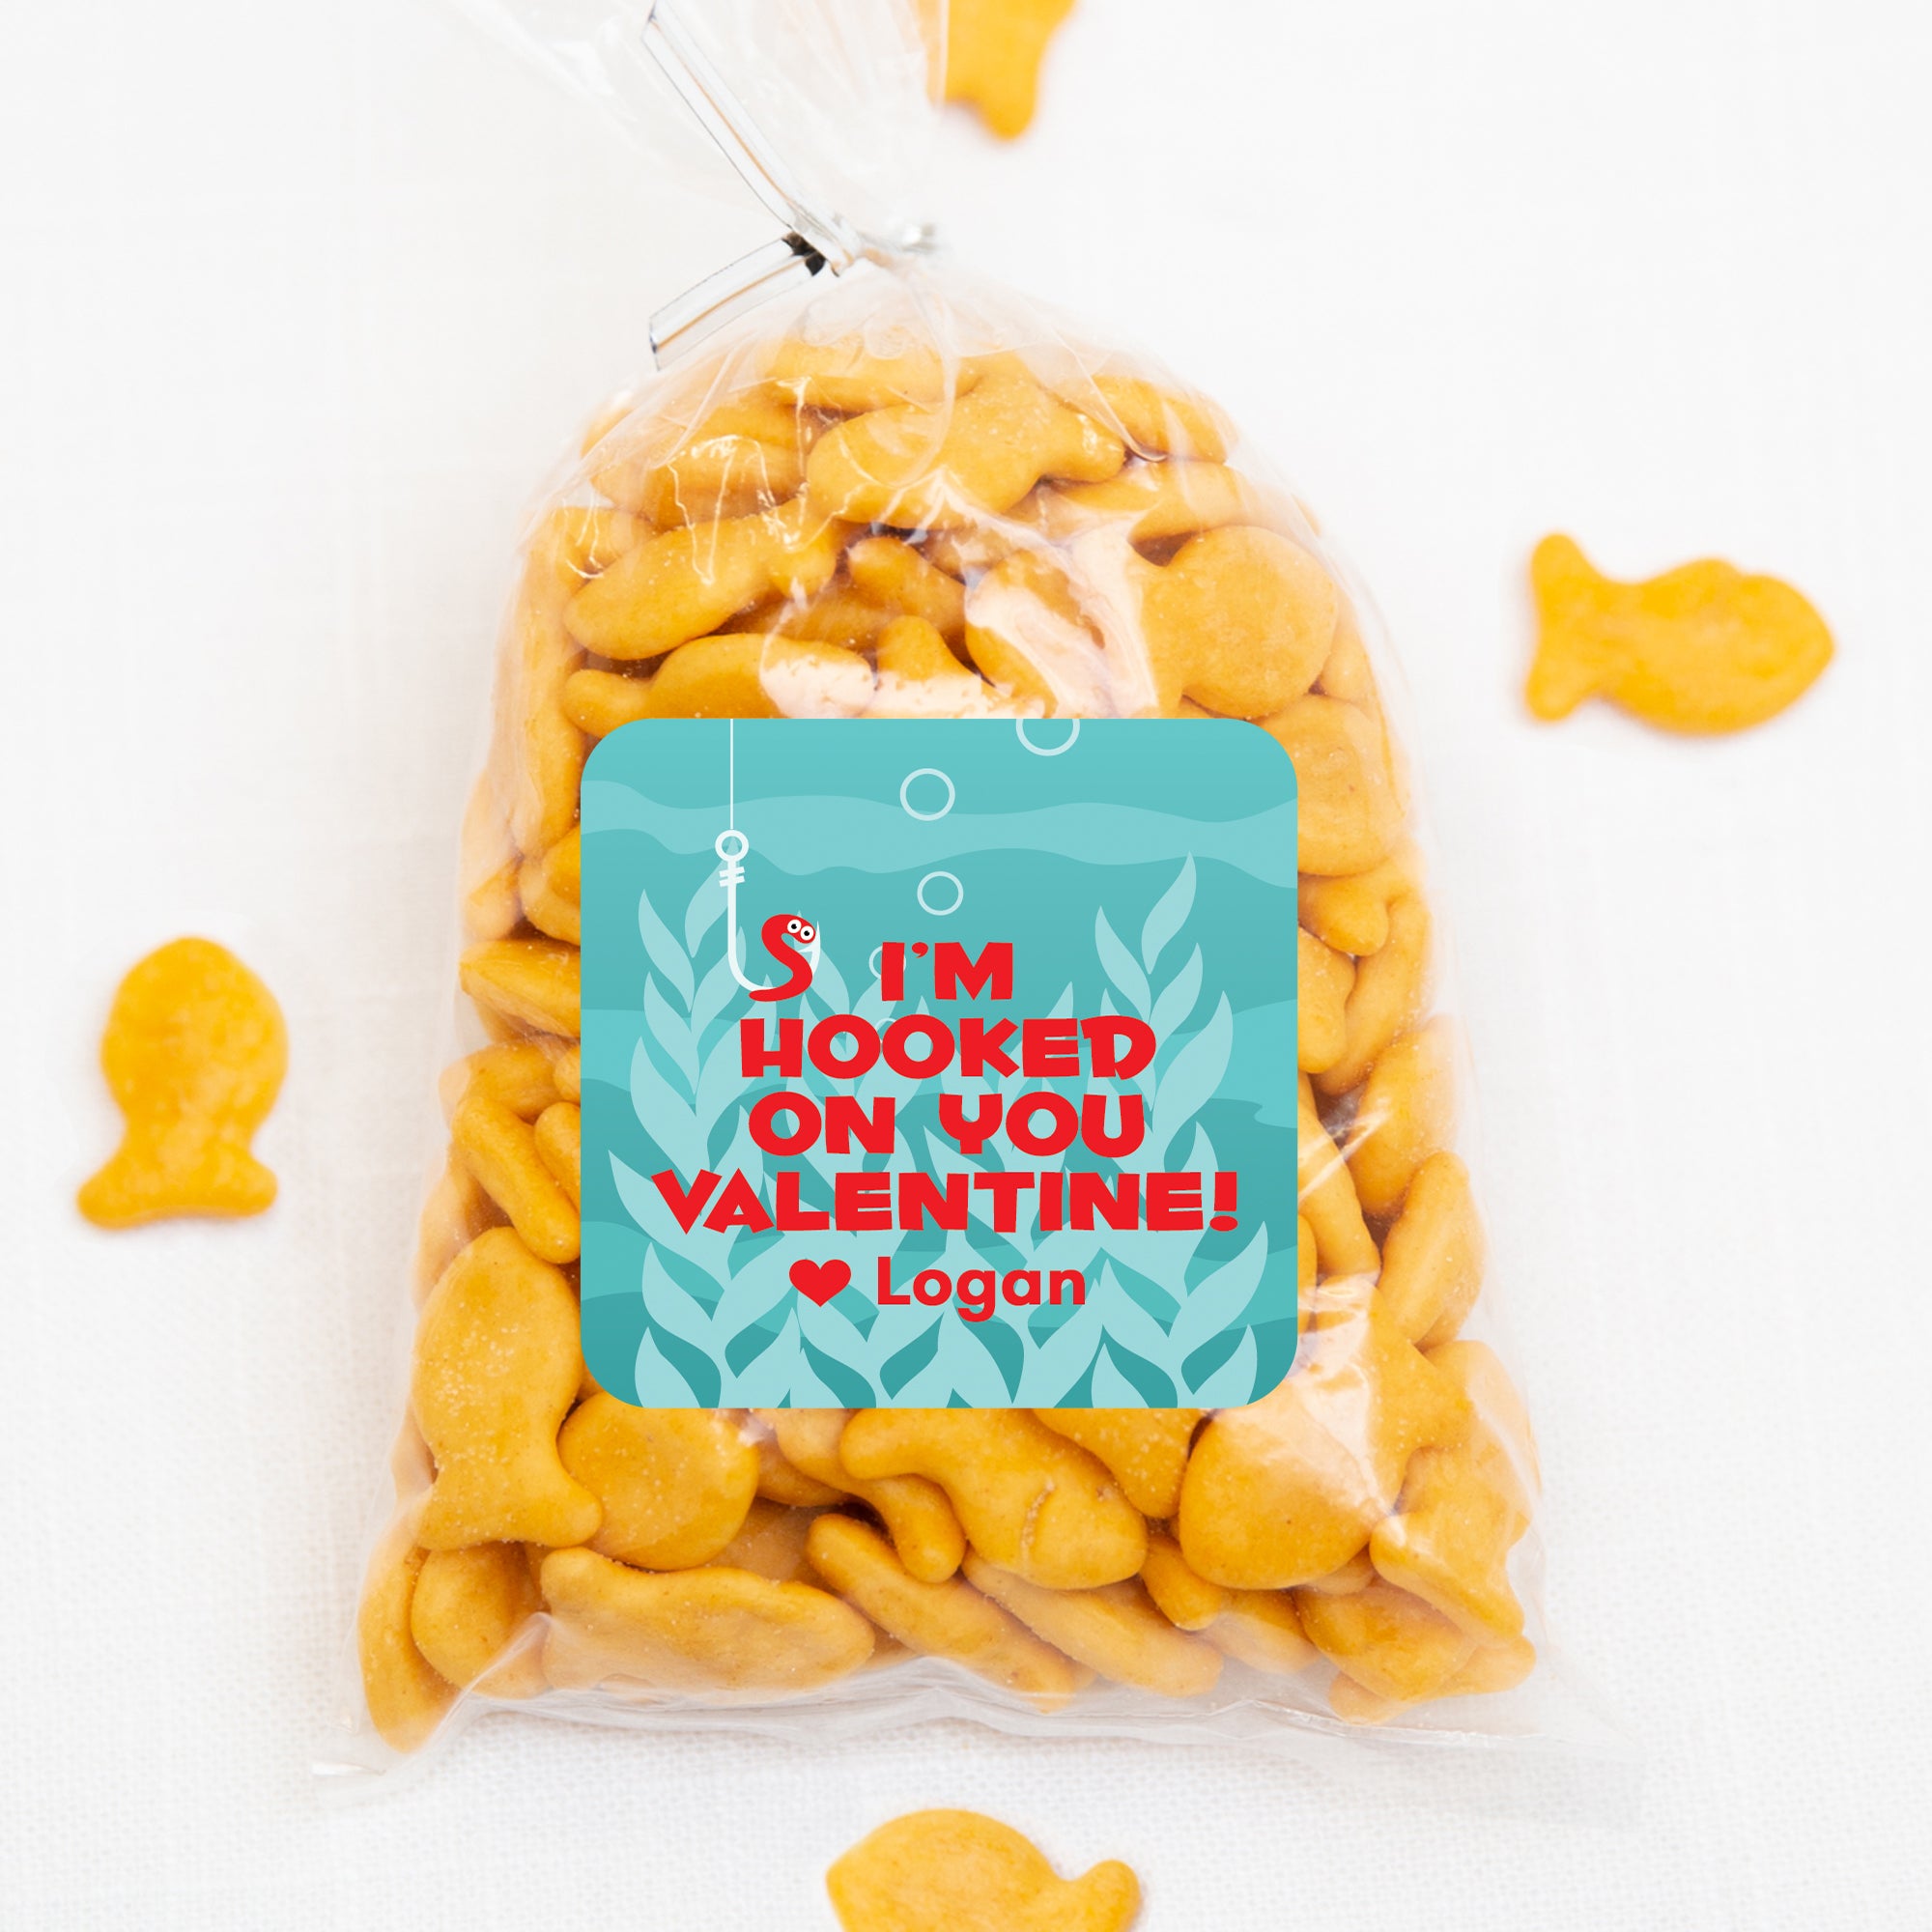 Hooked on you Valentine treat bag sticker | underwater with worm on hook | 2.5" Square Valentine's Day Sticker for candy bag | Classroom Party | Personalized stickers | PIPSY.COM